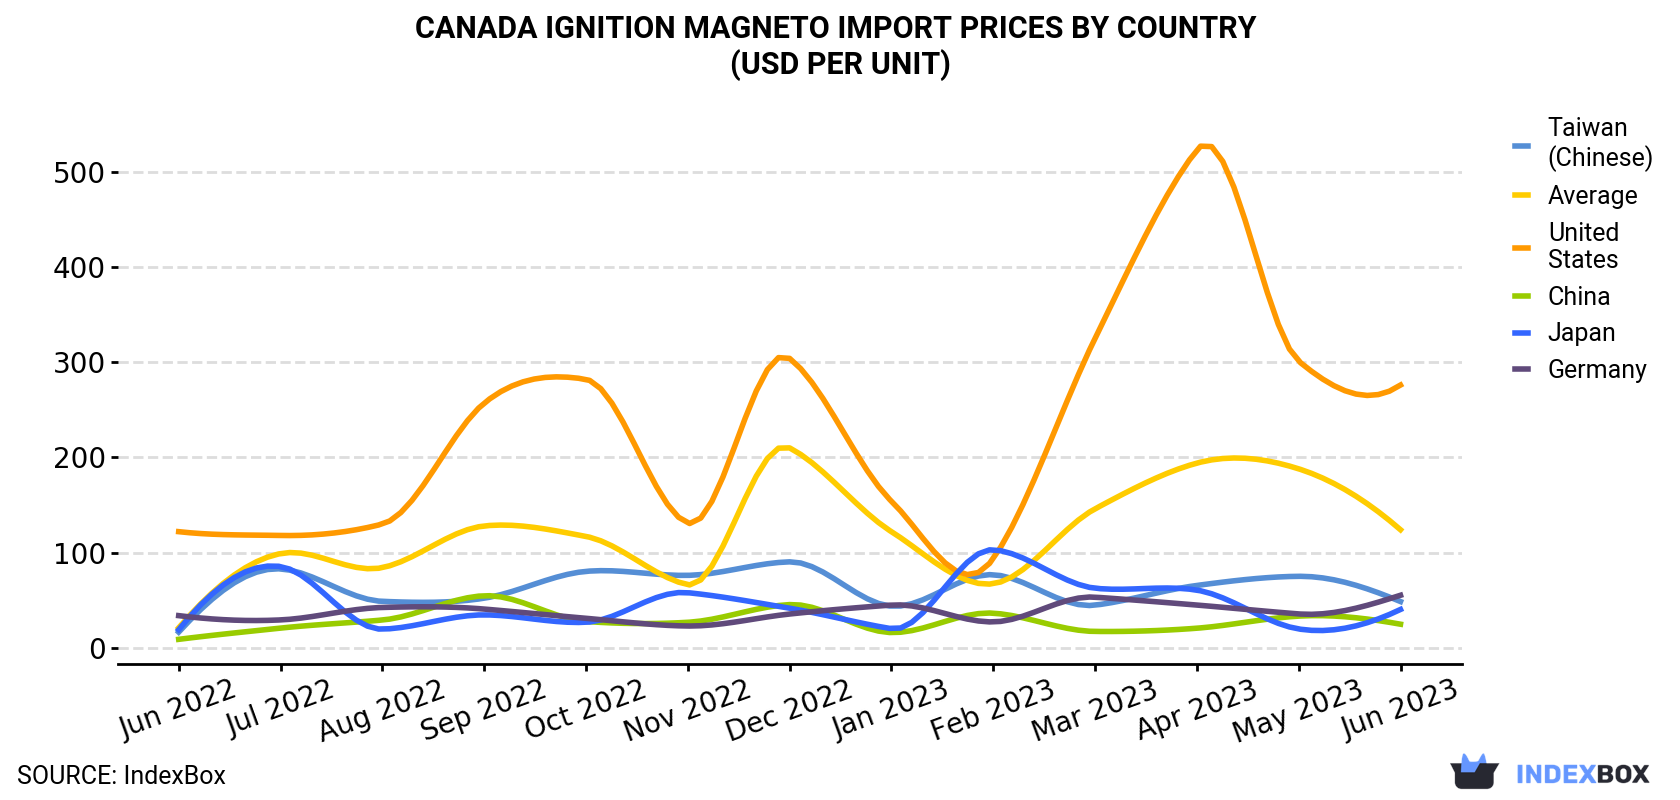 Canada Ignition Magneto Import Prices By Country (USD Per Unit)